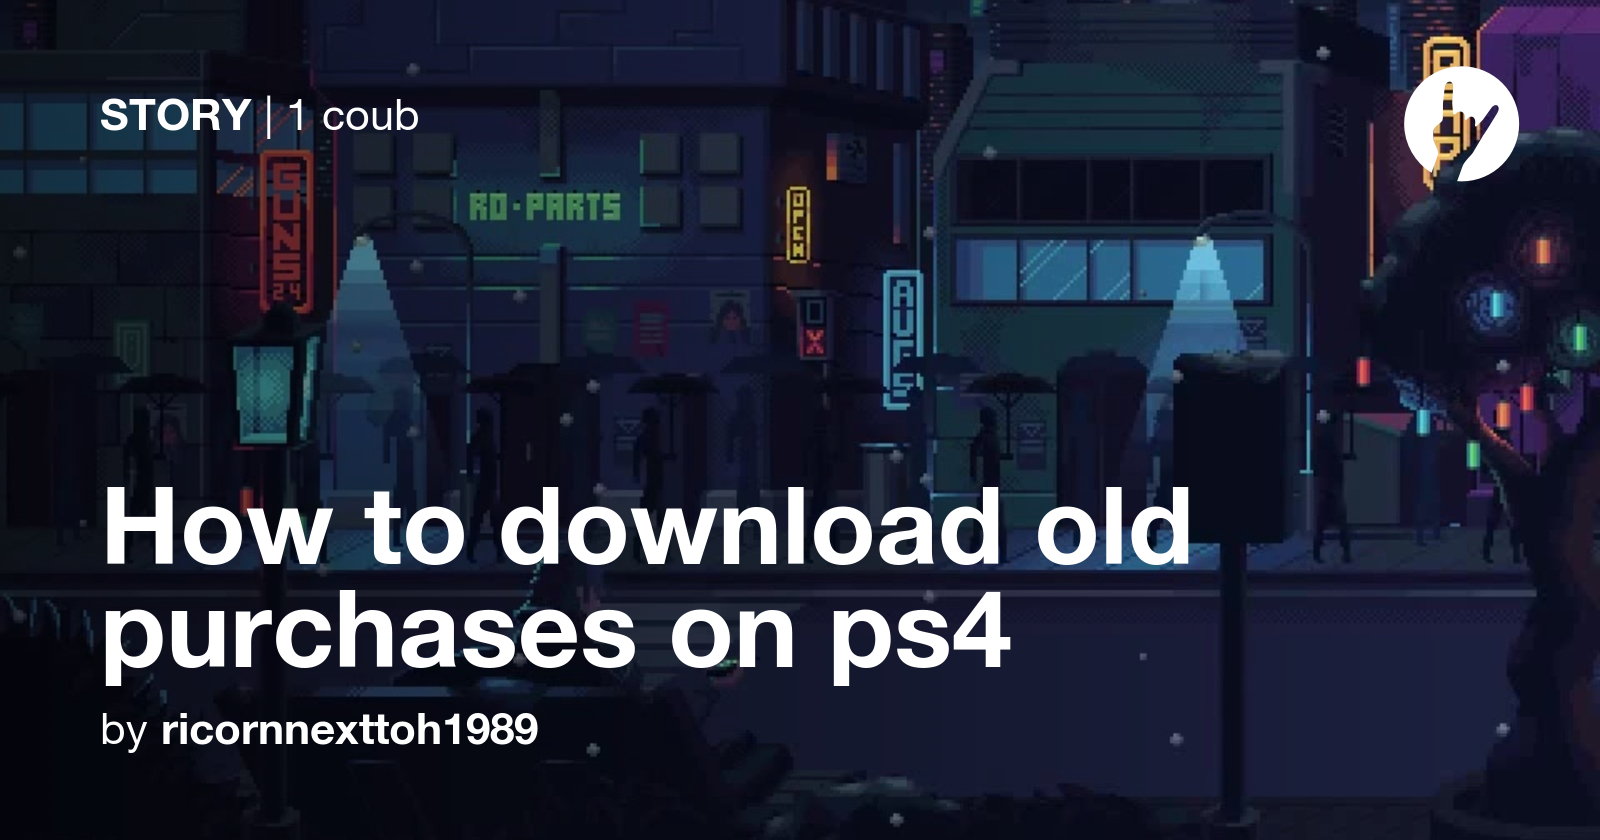 How to download old purchases on ps4